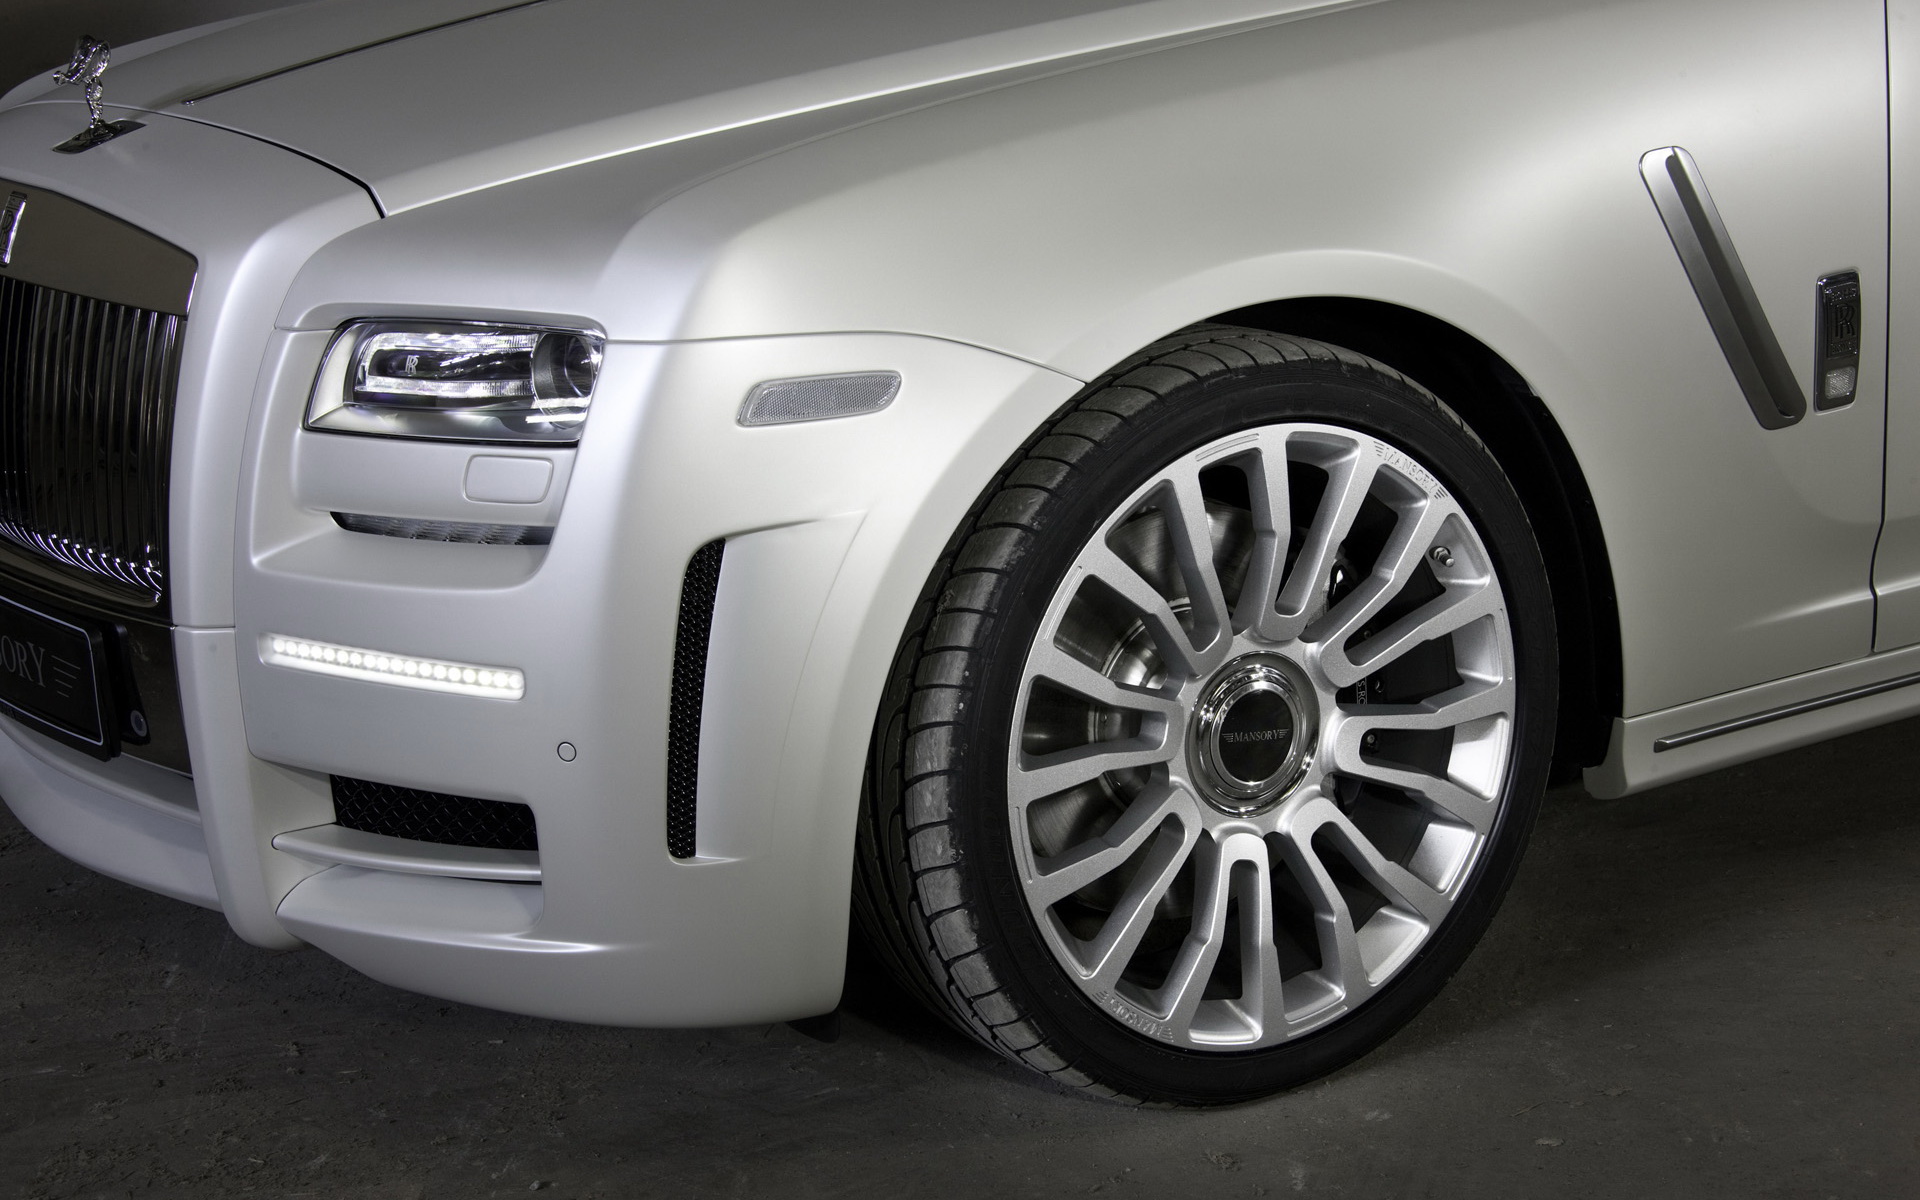 2010 Mansory Rolls-Royce(˹˹) White Ghost Limited(ֽ10)